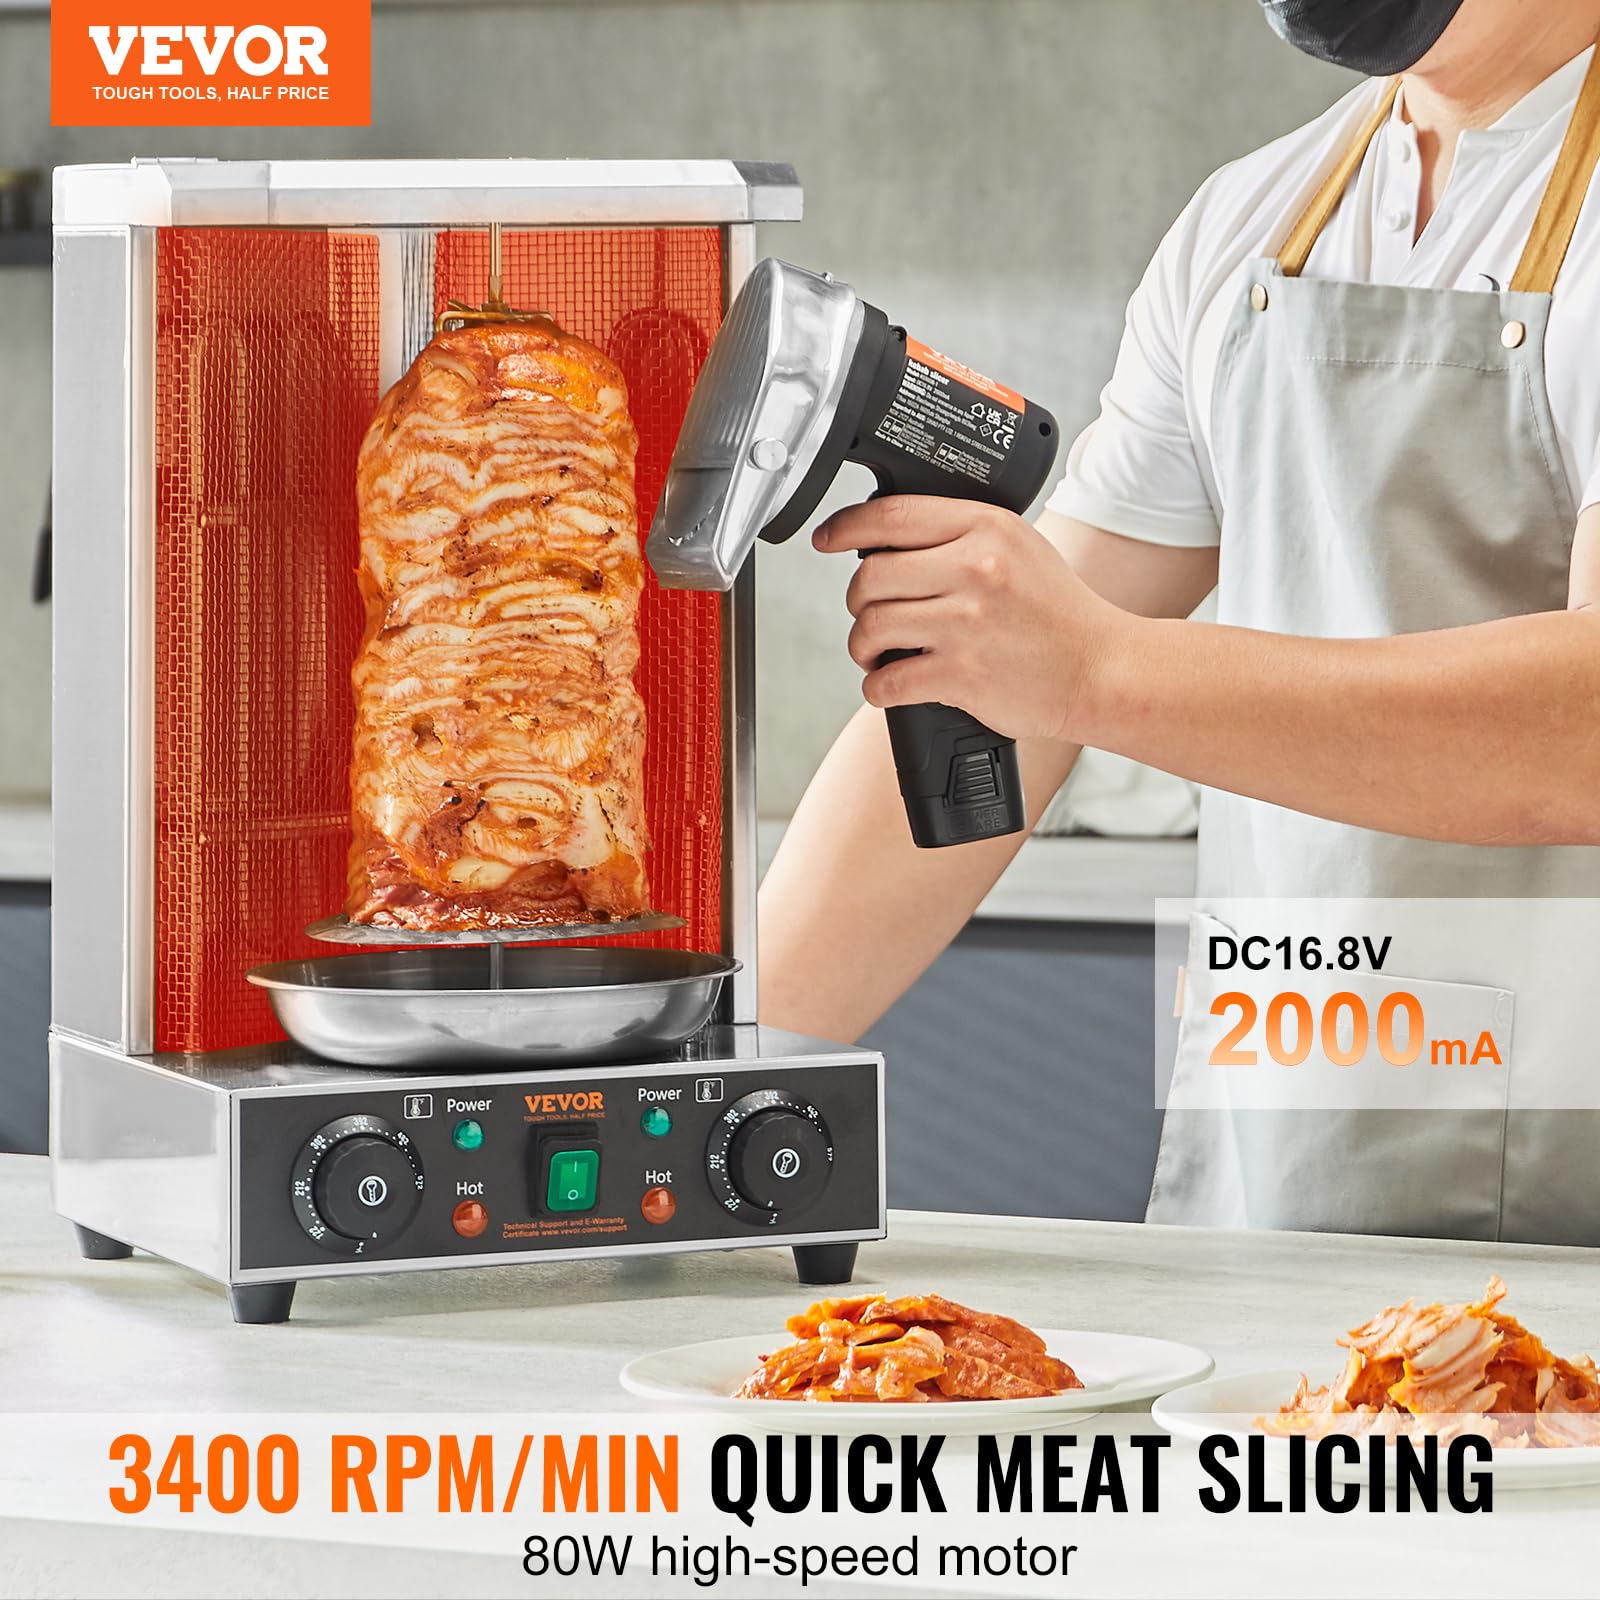 VEVOR Electric Shawarma Knife, 80W Cordless Battery Professional Turkish Knife, Commercial Stainless Steel Gyro Cutter, Doner Kebab Meat Slicer with 2 Blades, Φ4/100mm, 0-8mm Adjustable Thickness